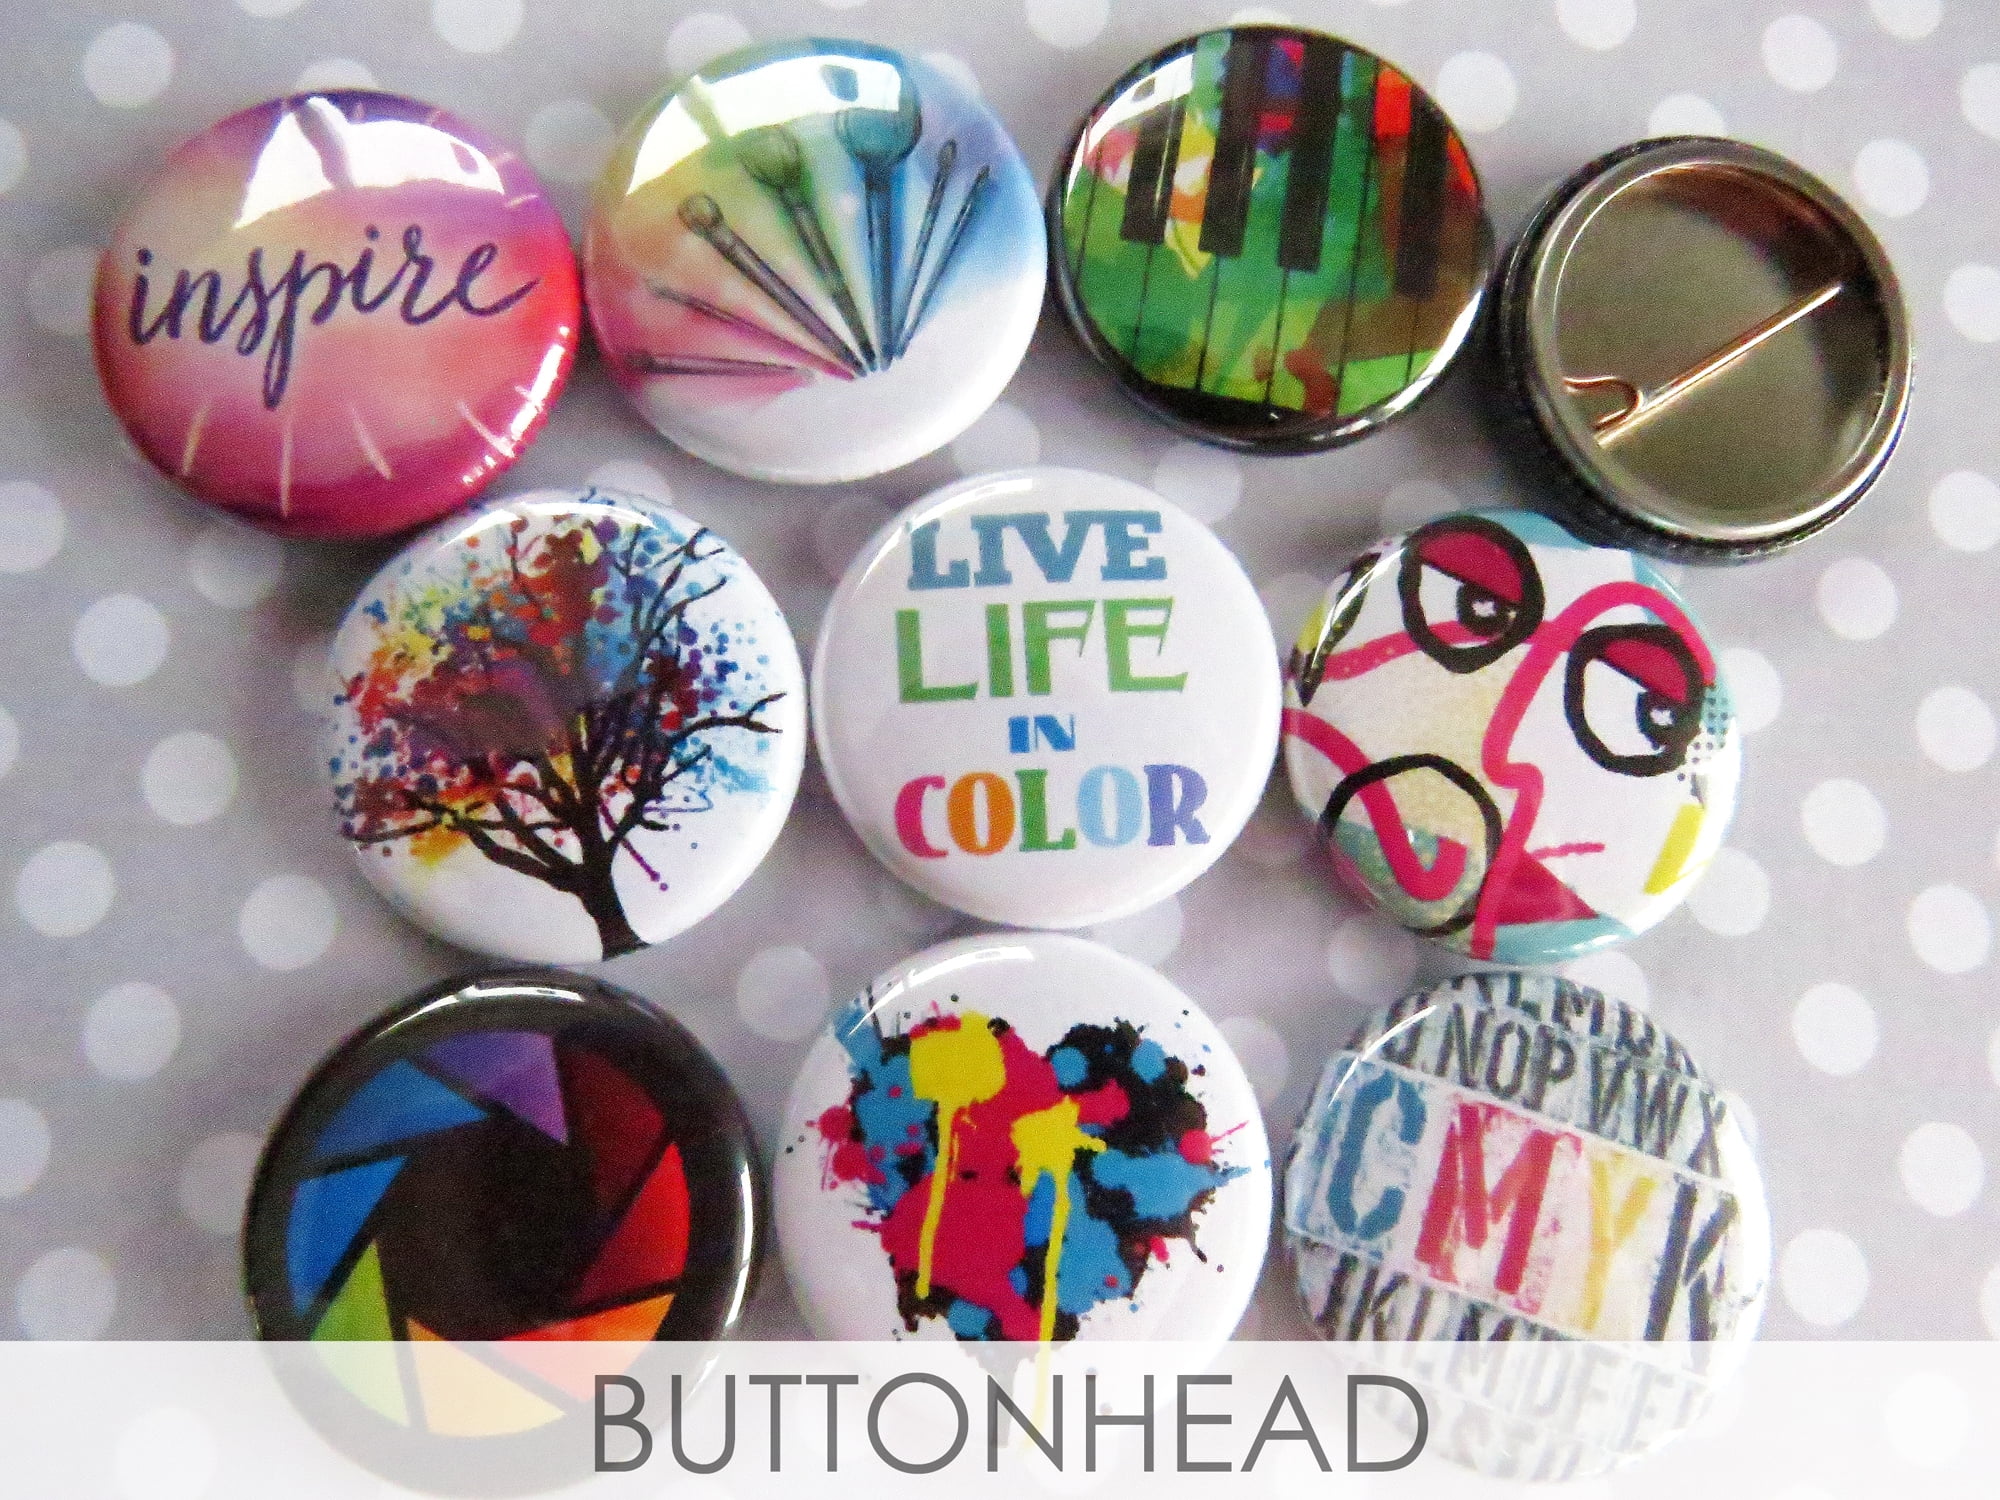 Inspirational button pins. Lot of 25. More than +100 designs. 1 inch  buttons A+